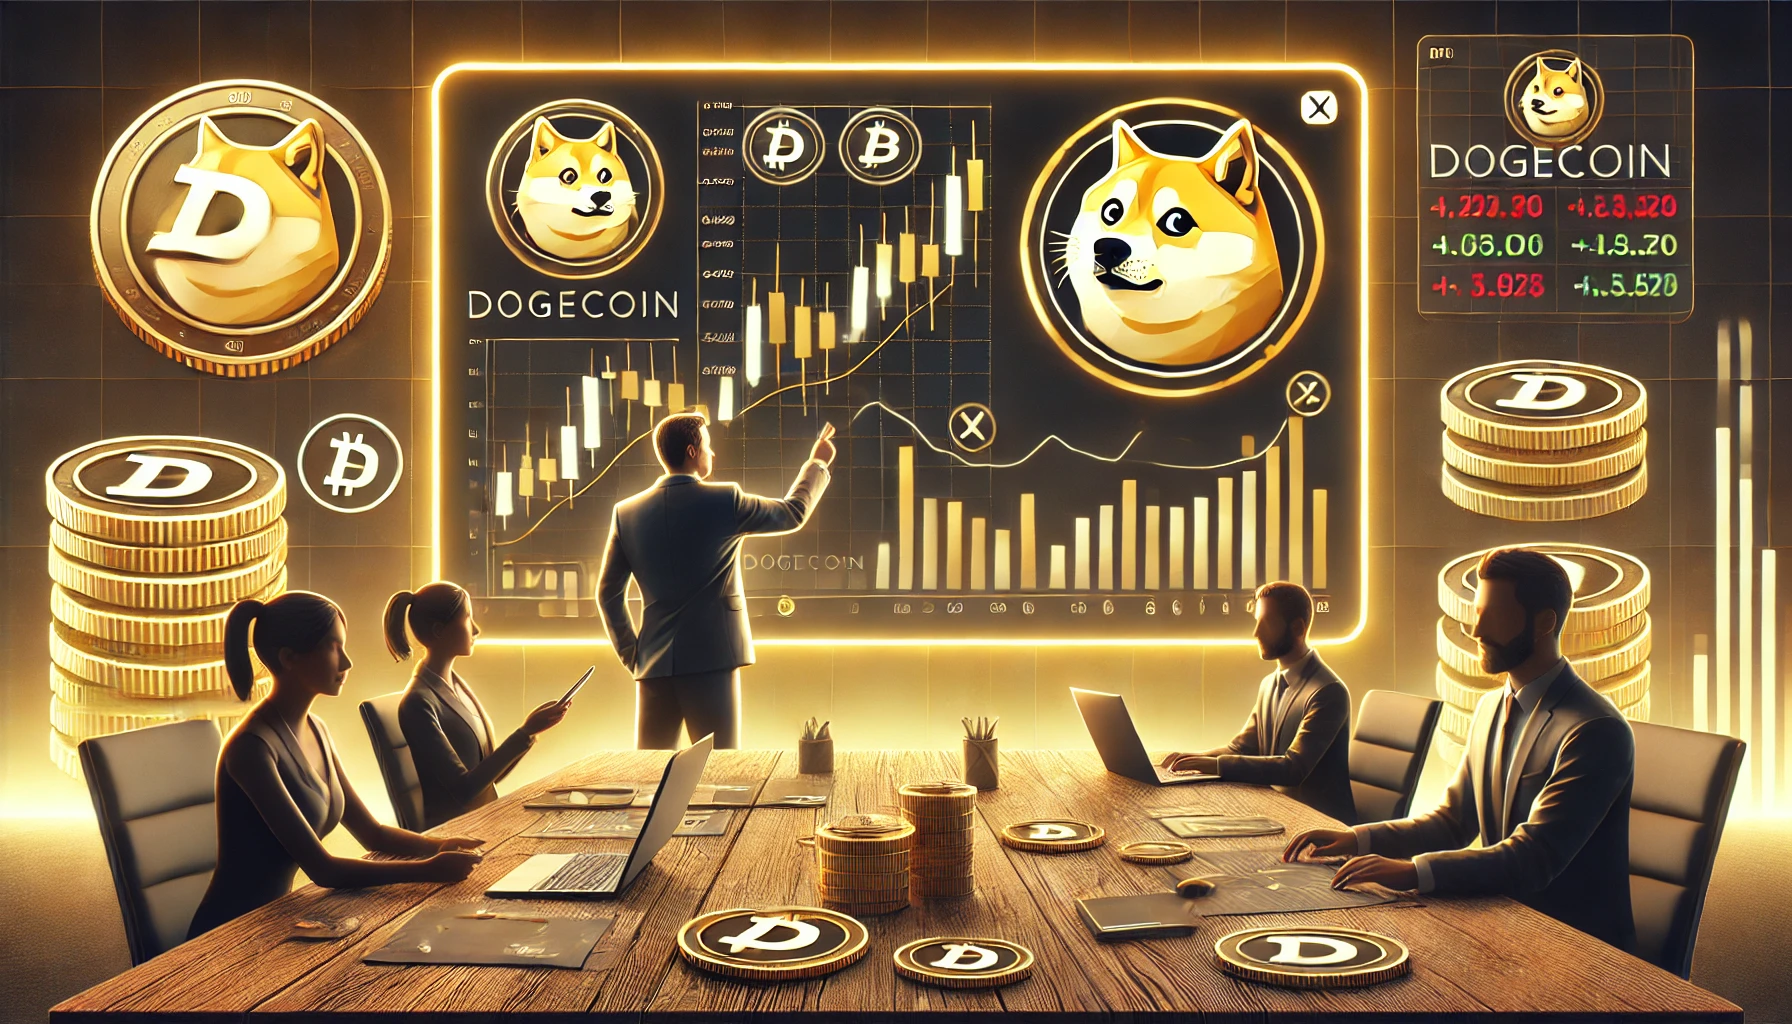 Dogecoin Traders Bet Against Token as Meme Coin Mania Subsides